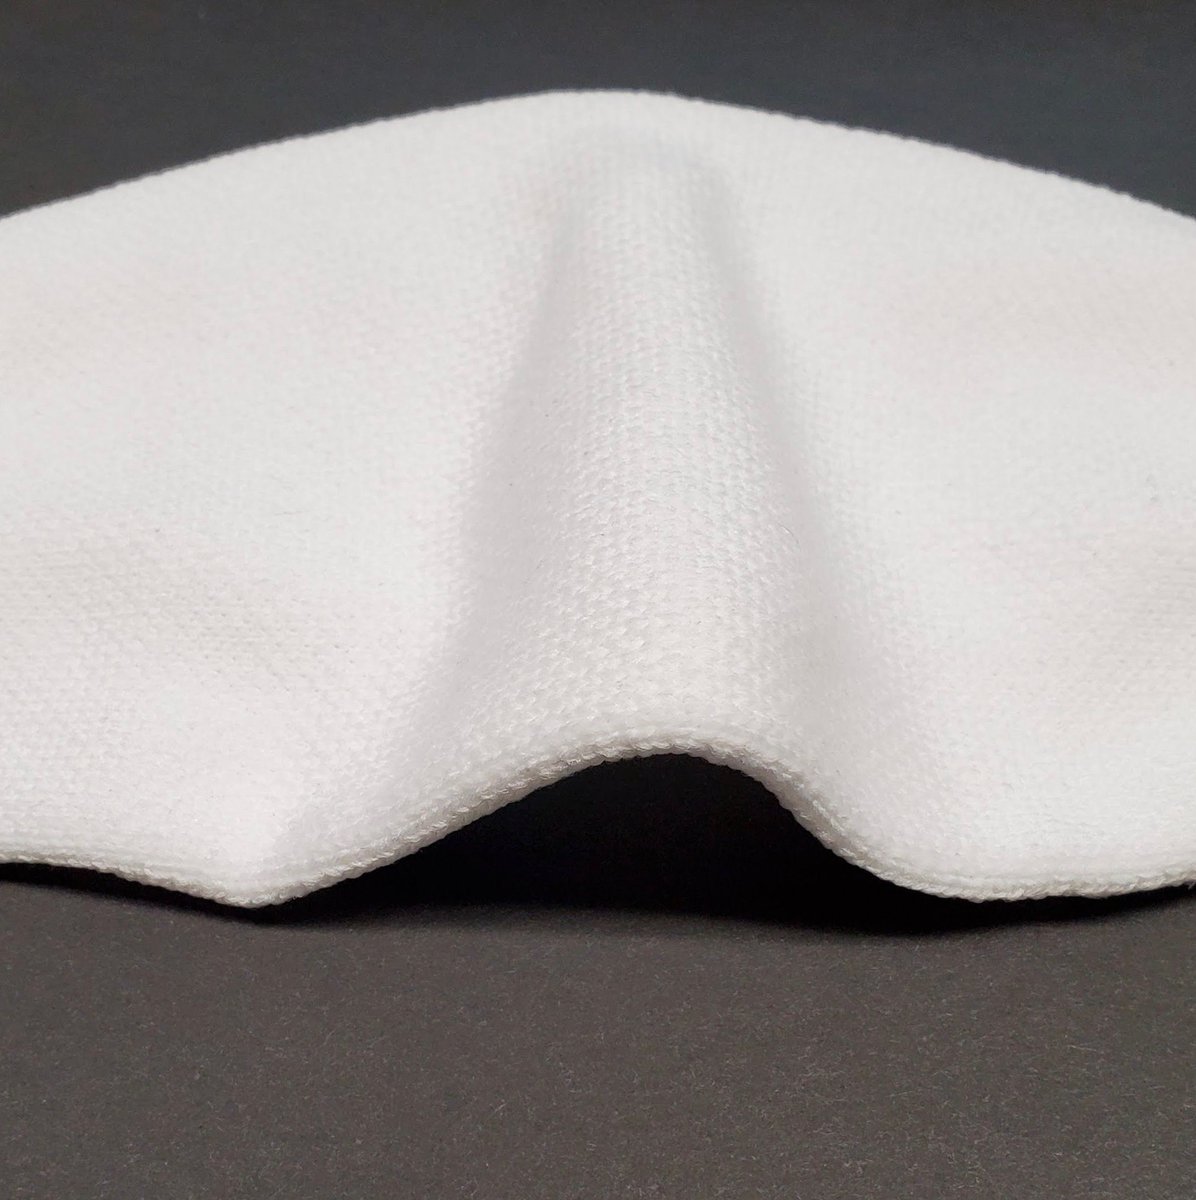 We have created an integrated pouch in our #washablefacecovering #nonmedical, #reusablemask to hold a #Canadian aluminum strip that helps mold the mask over the nose, & keeping the price very low at $3.00*. Help keep disposablemasks out of landfills. engraftprosocks.com/en/